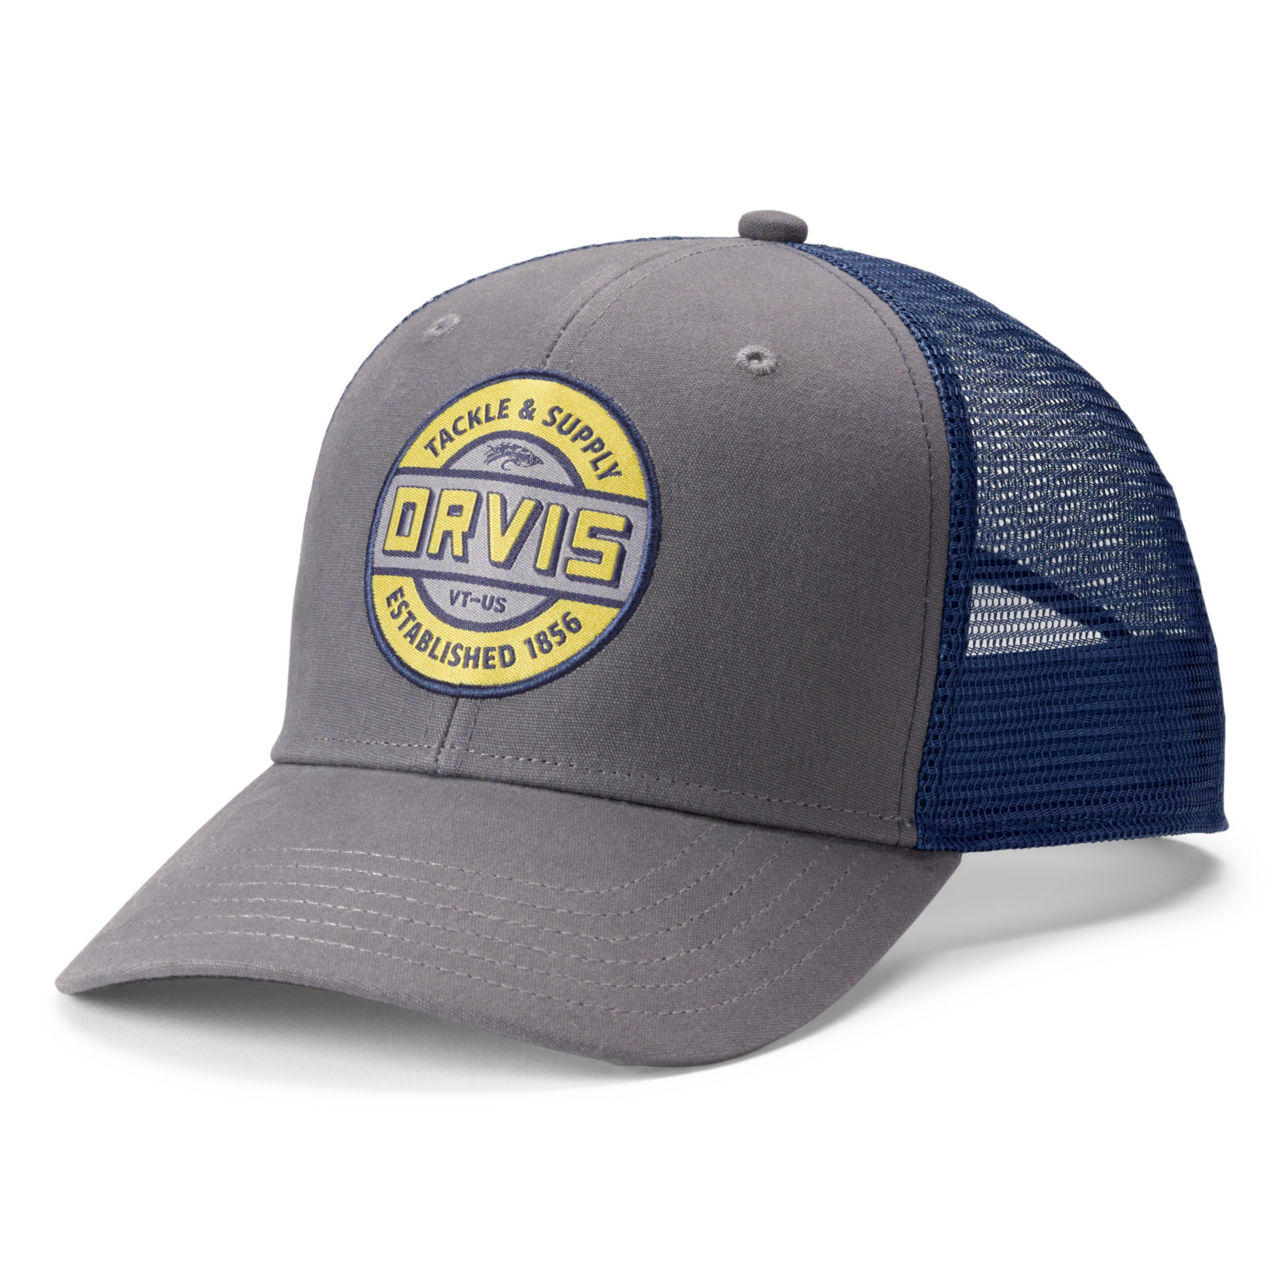 Tackle & Supply Trucker Hat - GRAY image number 0